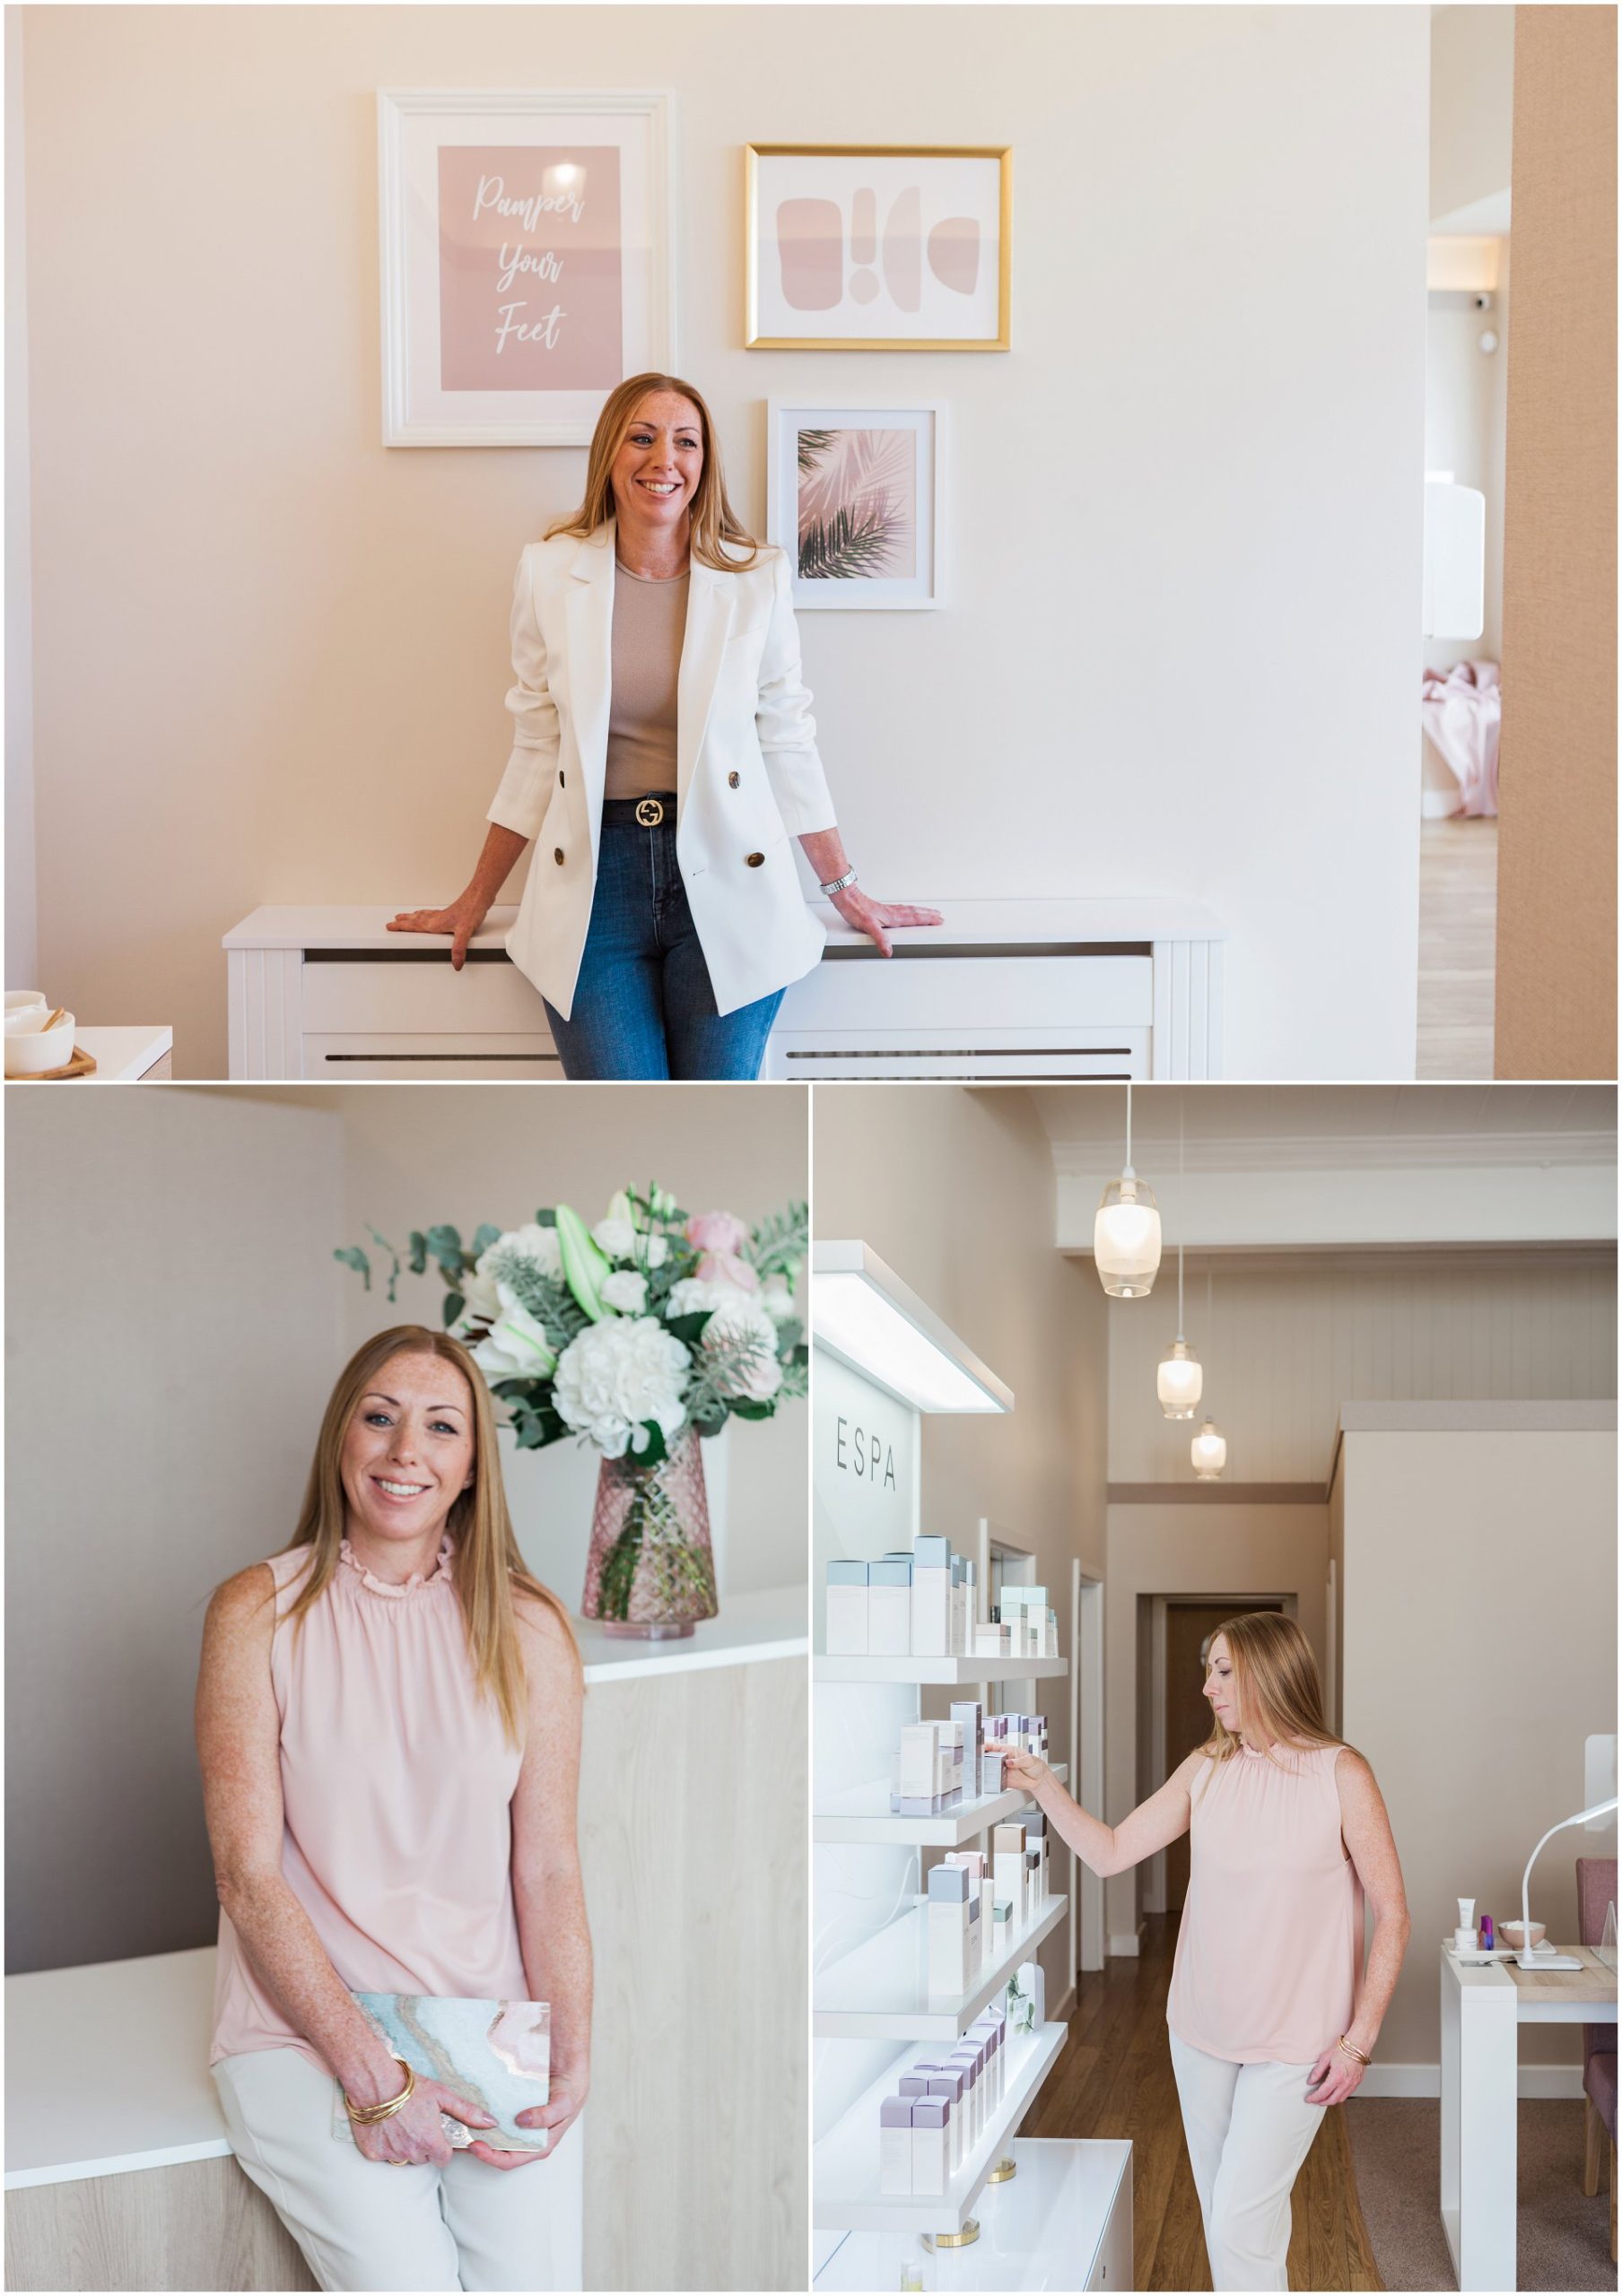 Beauty salon owner Nickie photographed in her salon. Beauty business owner brand shoot. Images by London brand photographer AKP Branding Stories